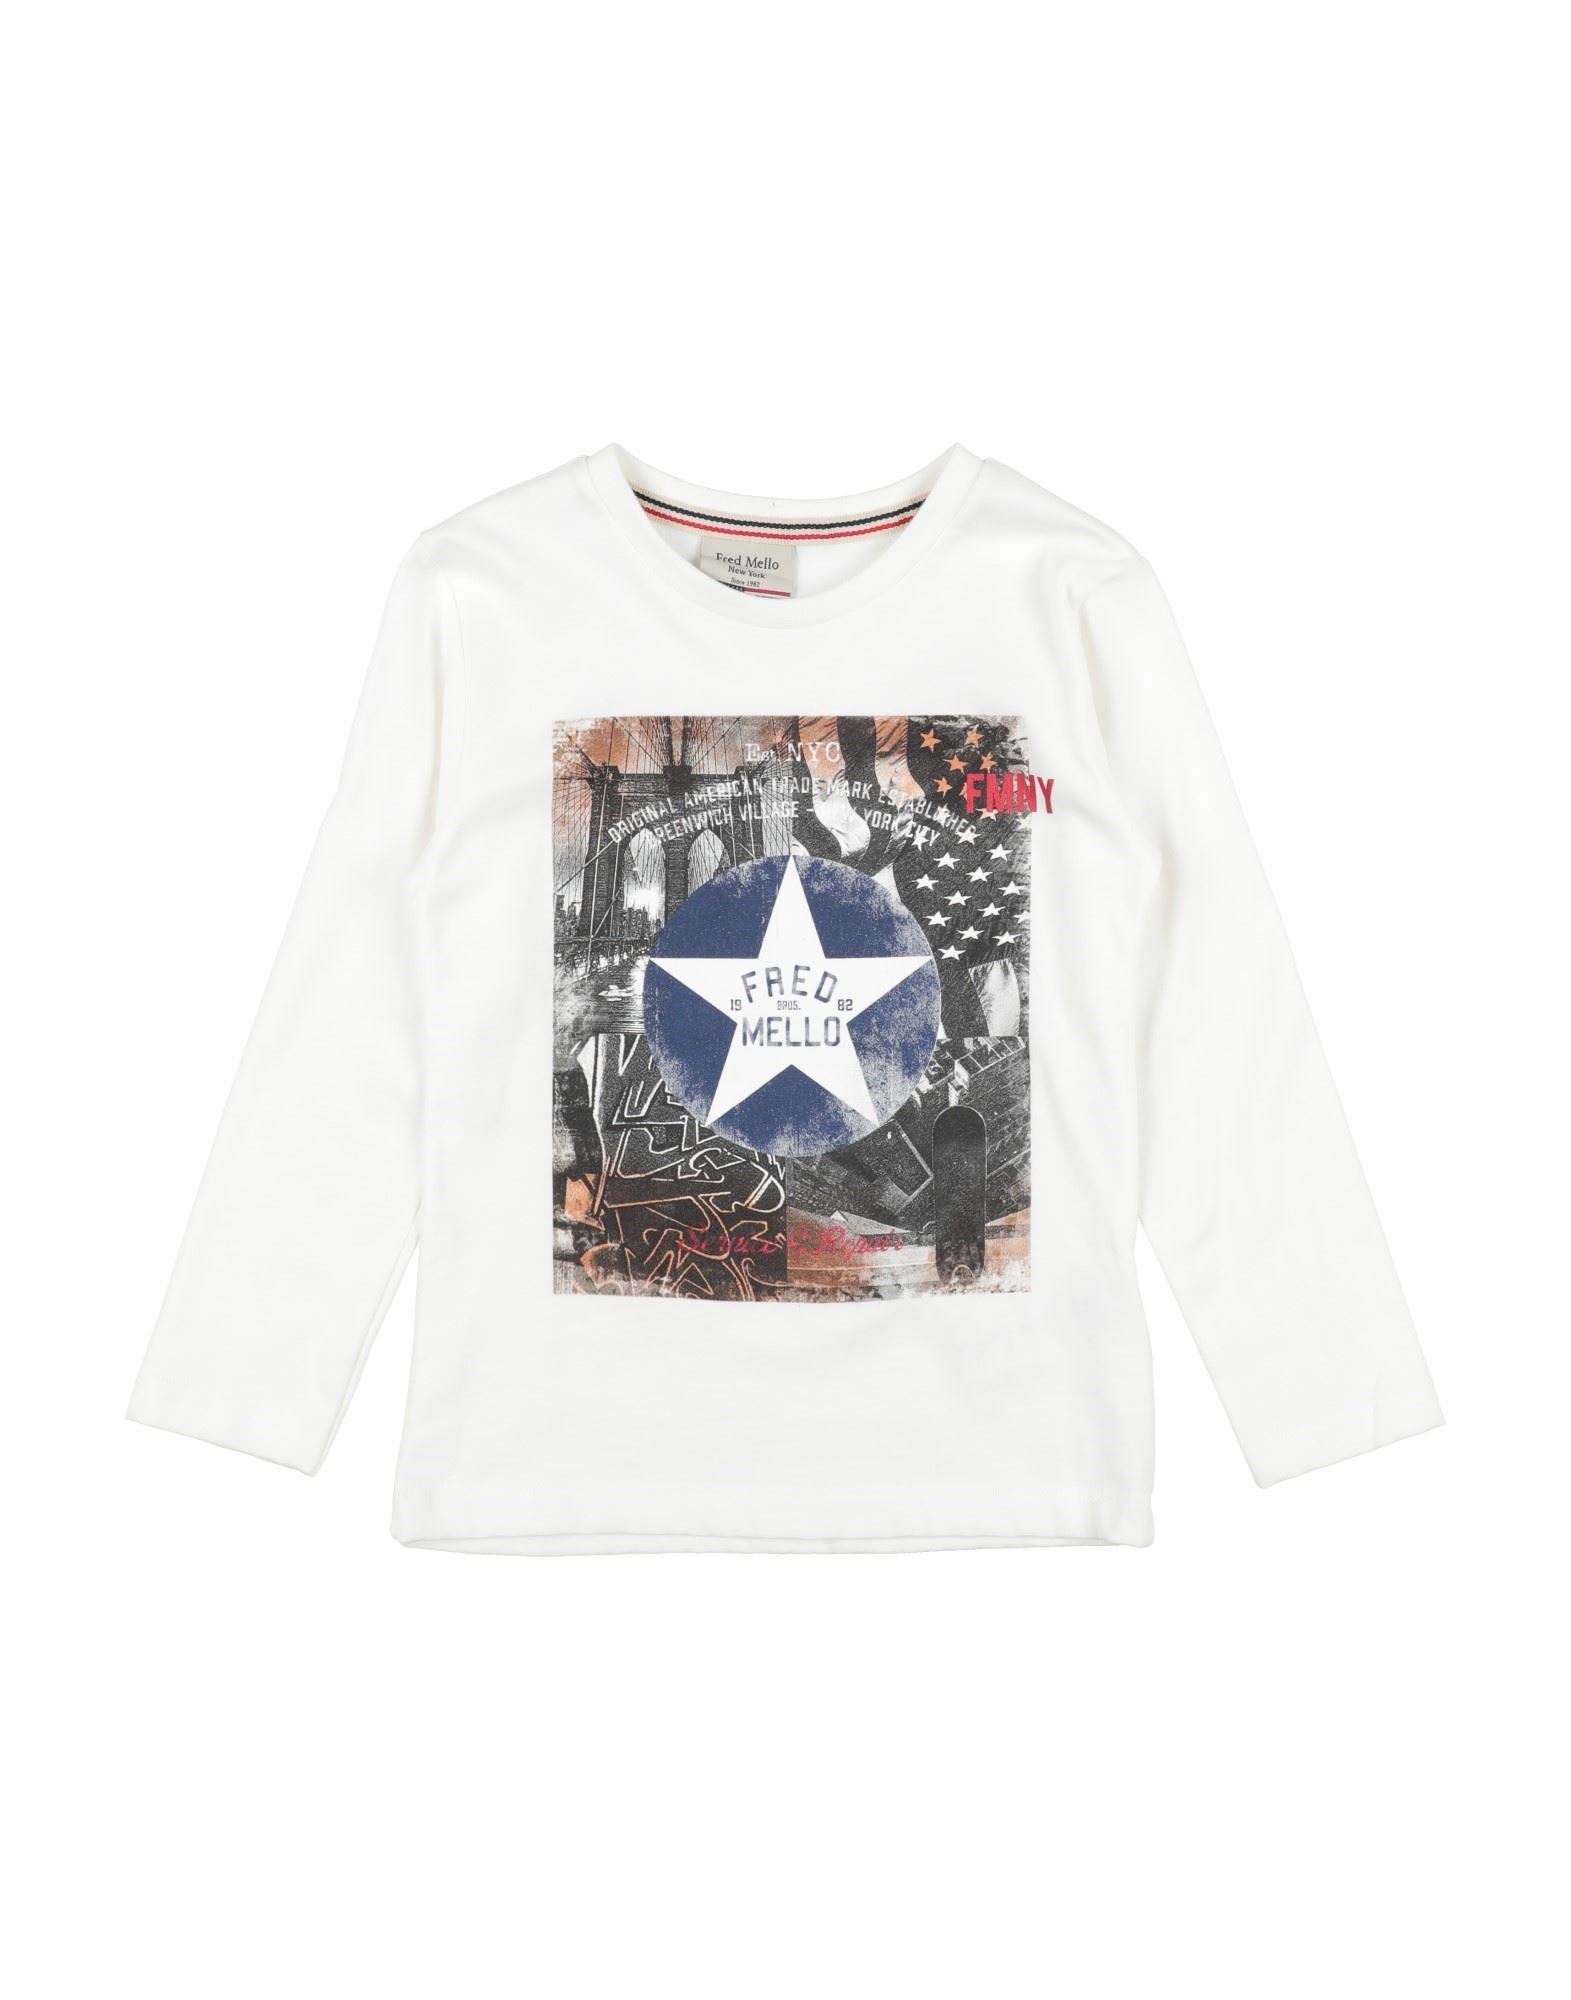 Fred Mello Kids' T-shirts In Ivory